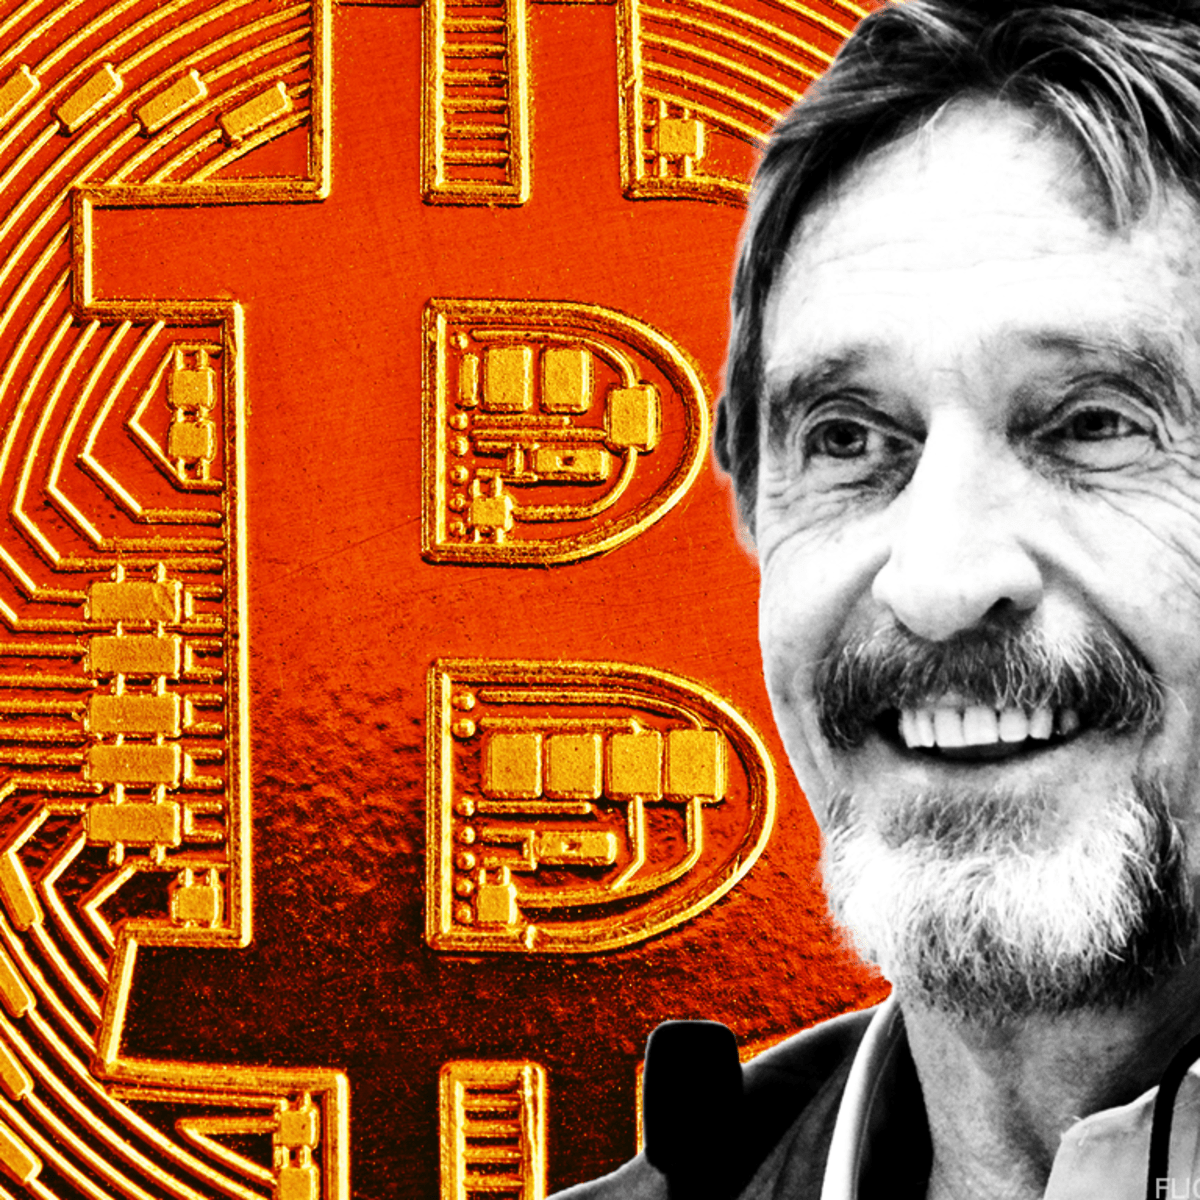 John McAfee Appears to Move Cryptocurrency Markets With a Single Tweet